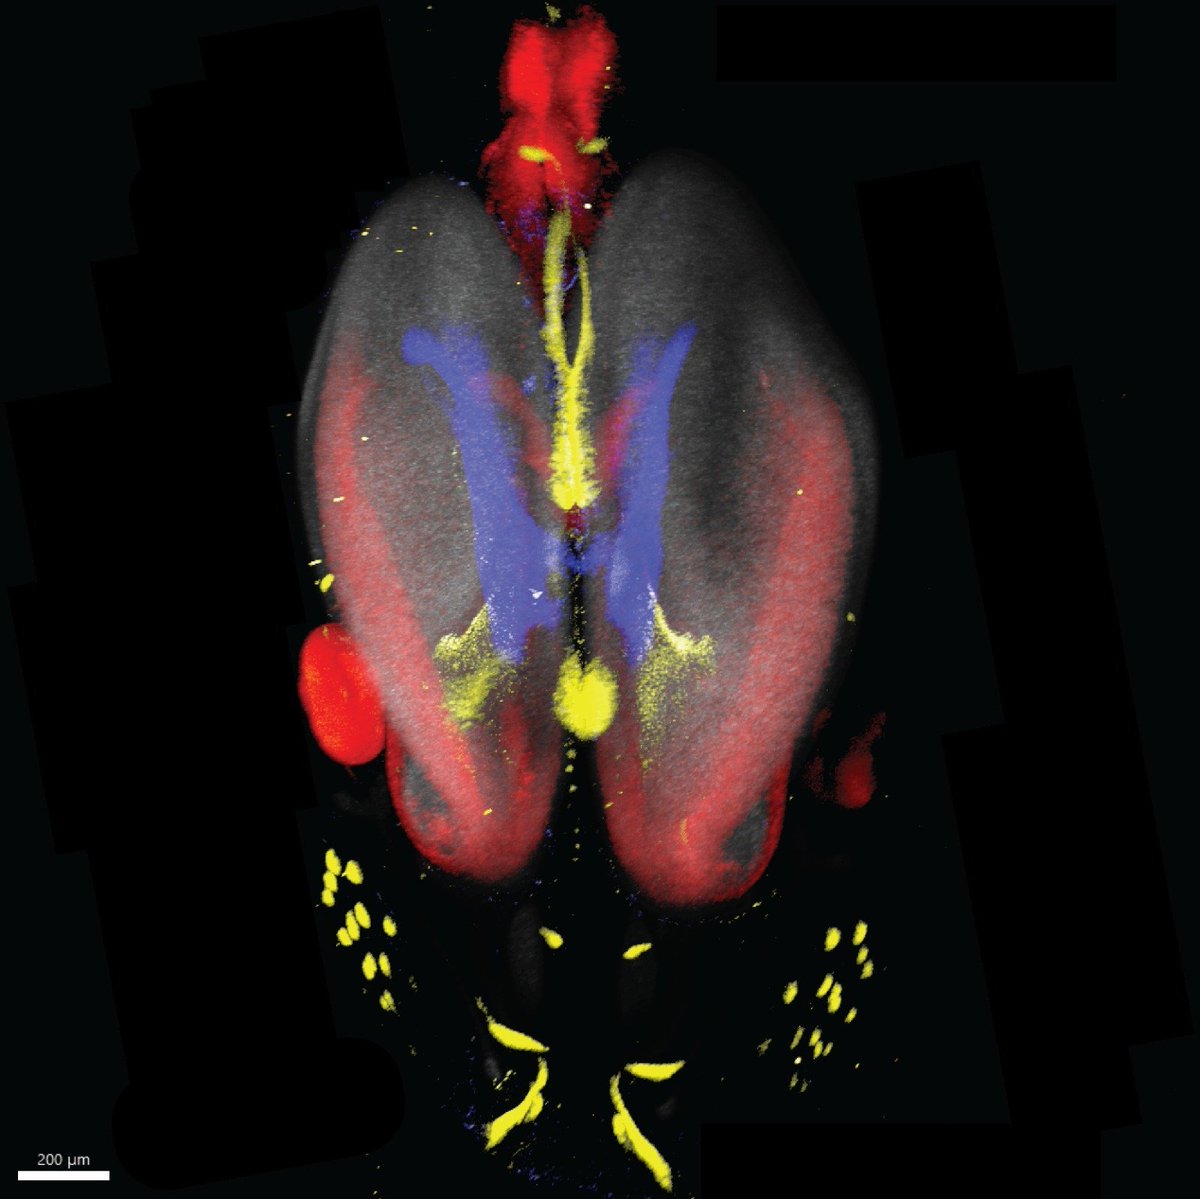 PhD student @danafd at our lab performs 3D multi-plex RNA-FISH using the HCR method to study patterning in the developing forebrain. This is a top view of the forebrain of an E12.5 mouse embryo showing the expression of Foxg1 (gray), Pax6 (red), Wnt8b (blue), and Shh (yellow).